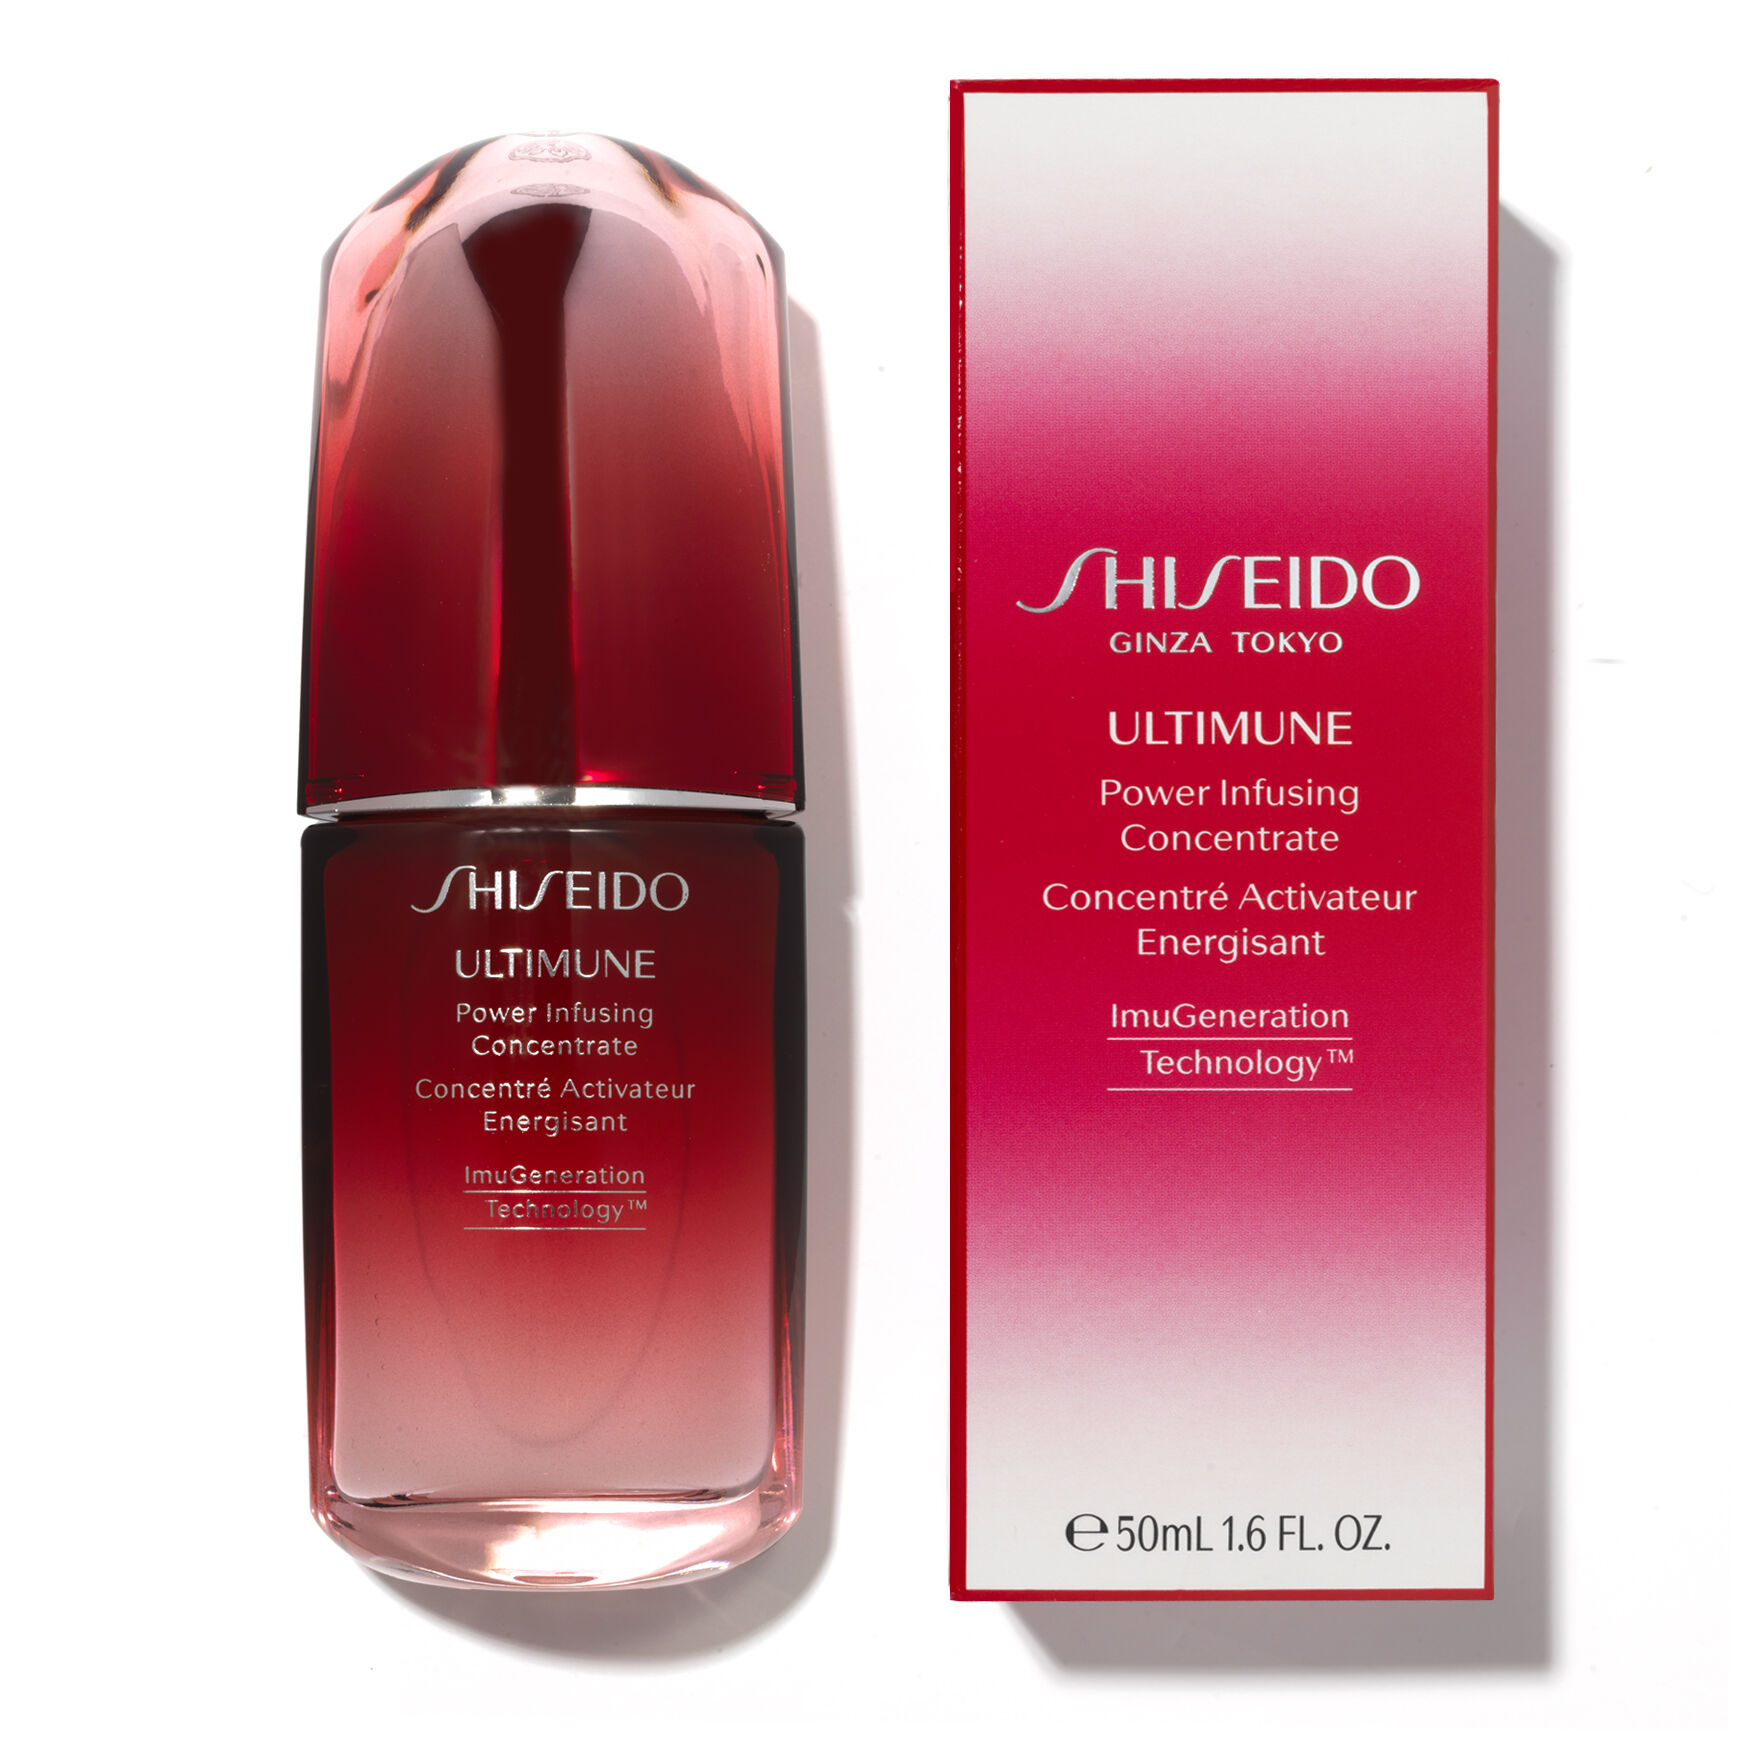 Shiseido ultimune power infusing concentrate. Ultimune концентрат шисейдо Power infusing. Концентрат Shiseido Ultimune Power infusing Concentrate. Shiseido Ultimate Power infusing. Крем Shiseido Ultimune.